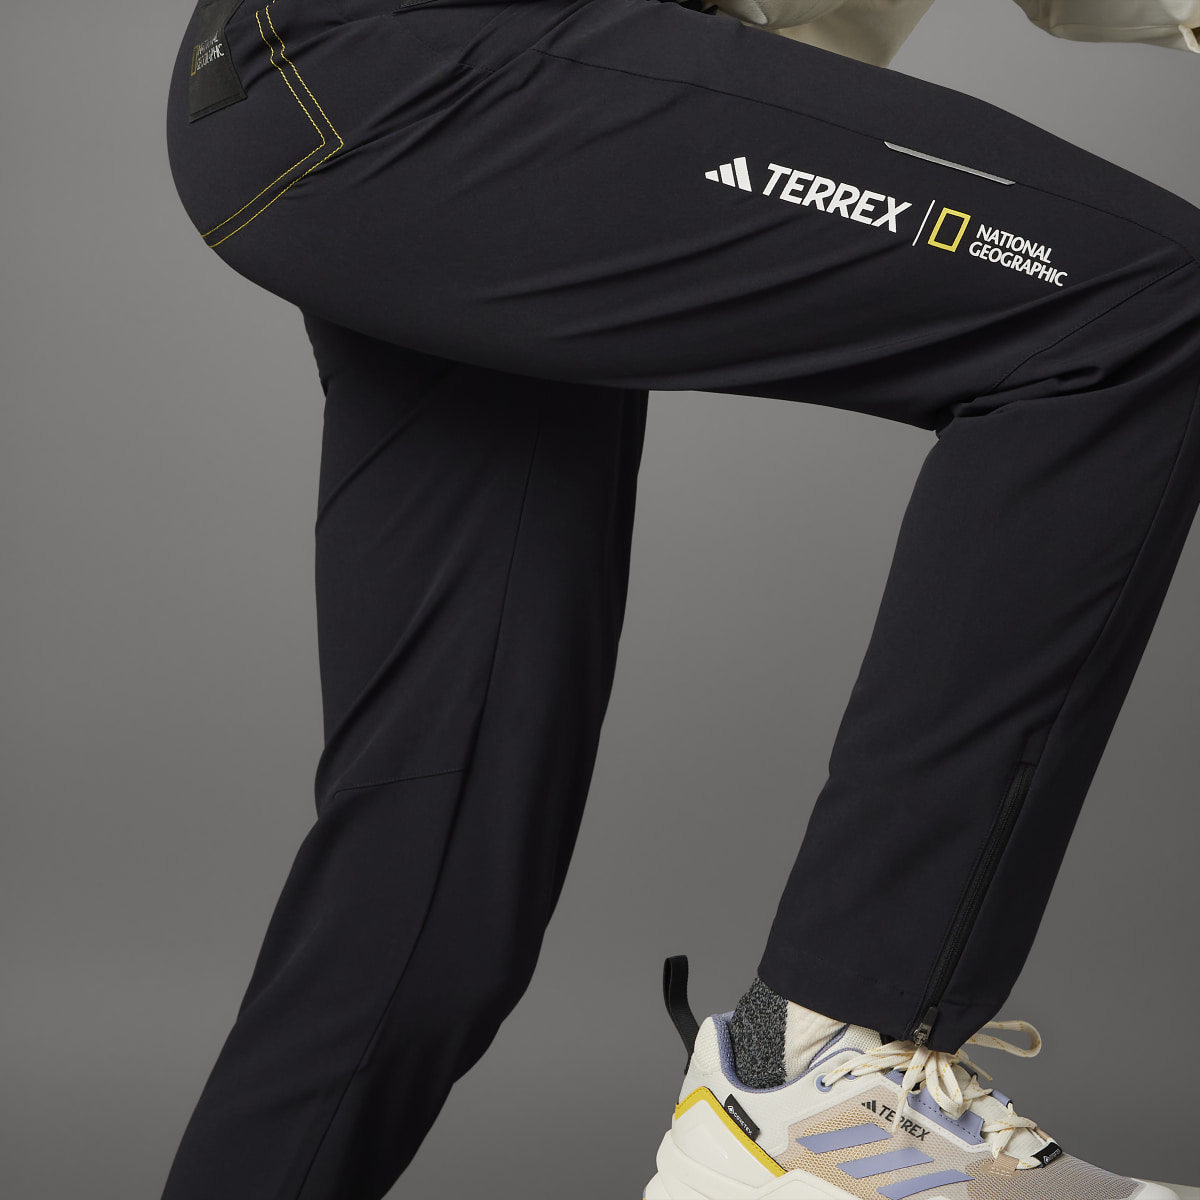 Adidas National Geographic Trousers. 5